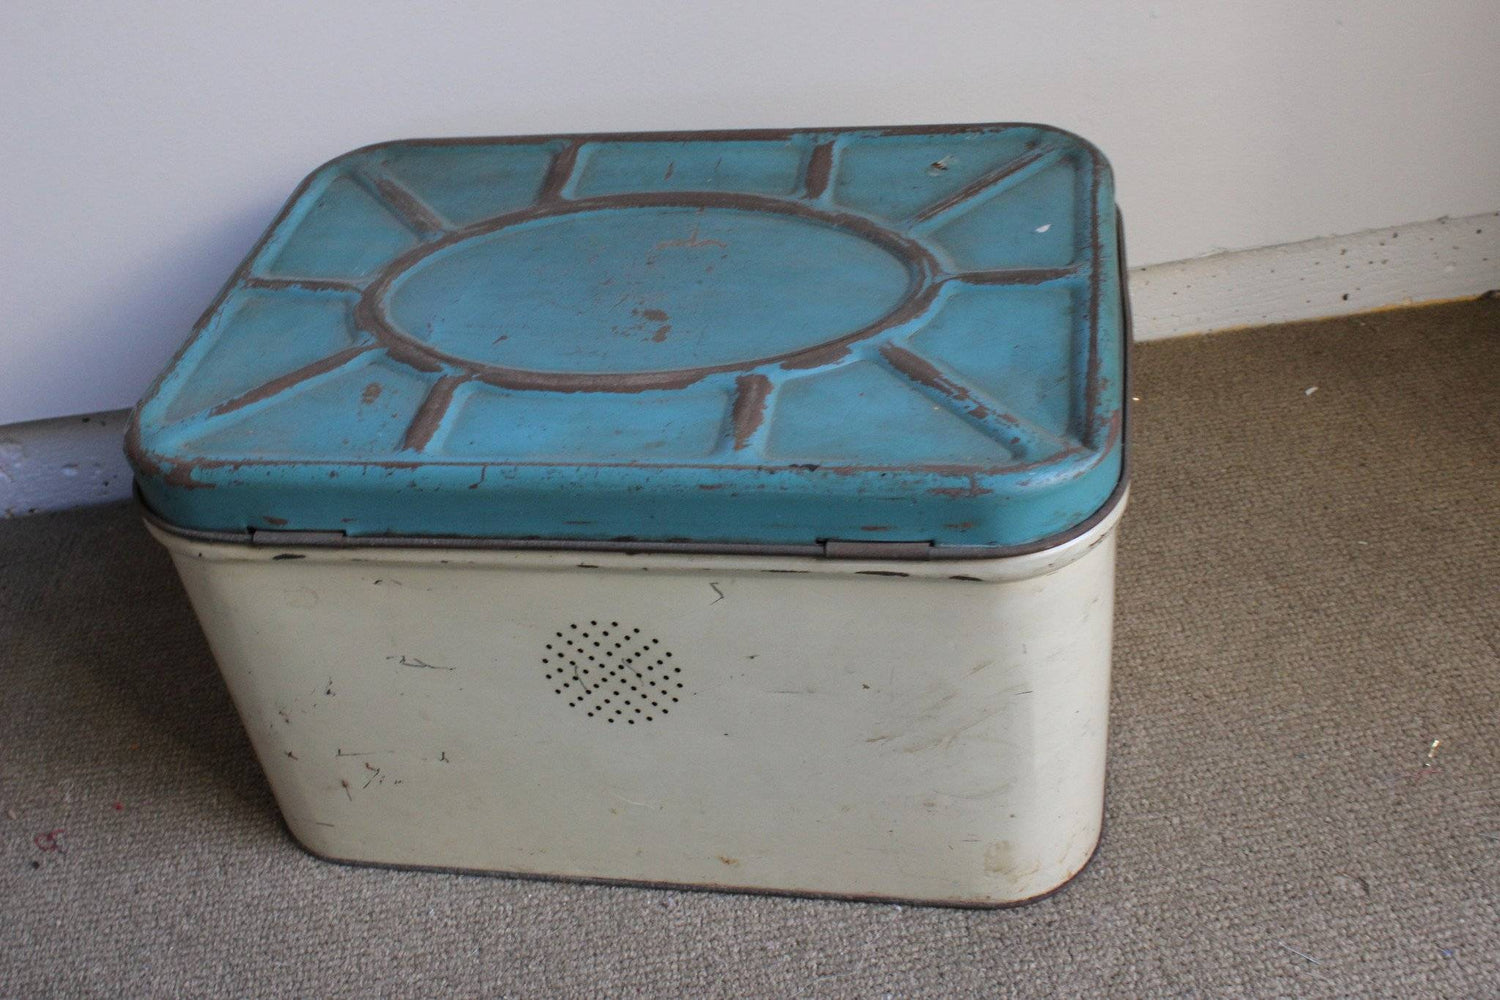 Vintage 1940s Breadbox with Blueberrys-Mint Chips Vintage Home Goods-1940s Kitchen,Blueberry,Breadbox,Country Kitchen,Kitchen Sotgae,Vintage,Vintage Breadbox,Vintage Kitchen